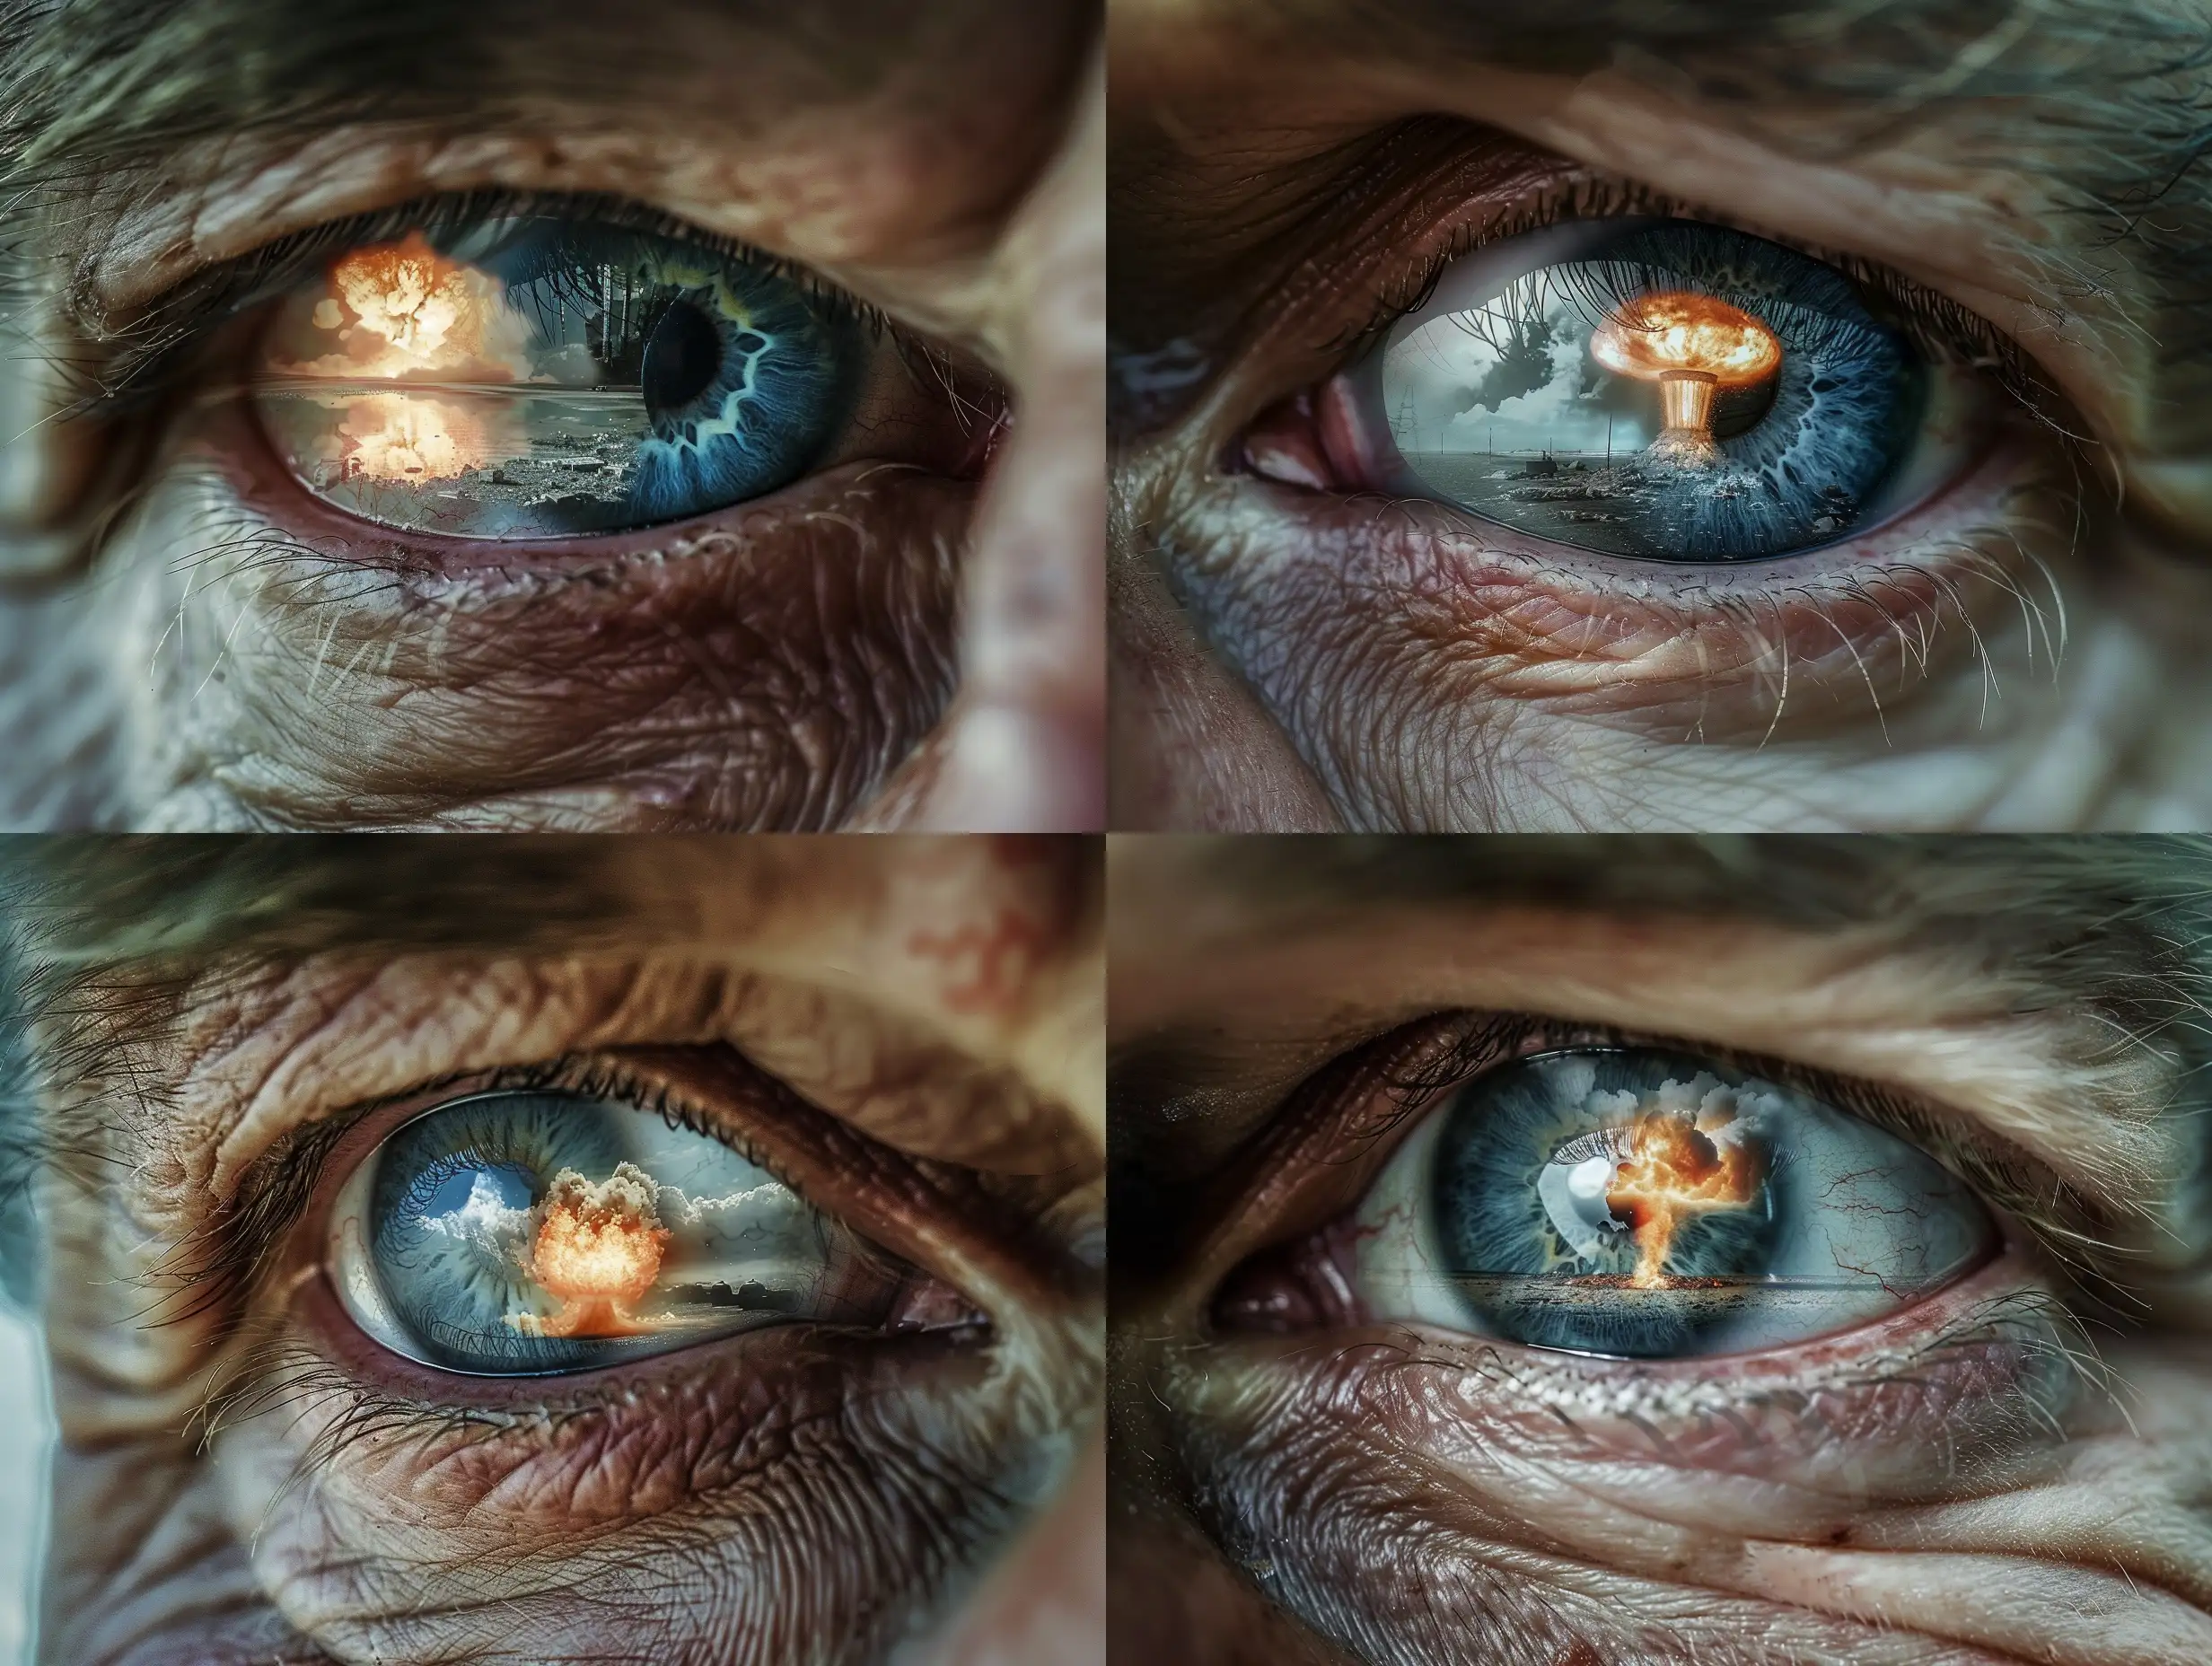 Detailed and very realistic colour photographic shot of tired soldier's blue eye. In the reflection in his eye we can verry well see a shiny mushroom cloud of nuclear explosion.